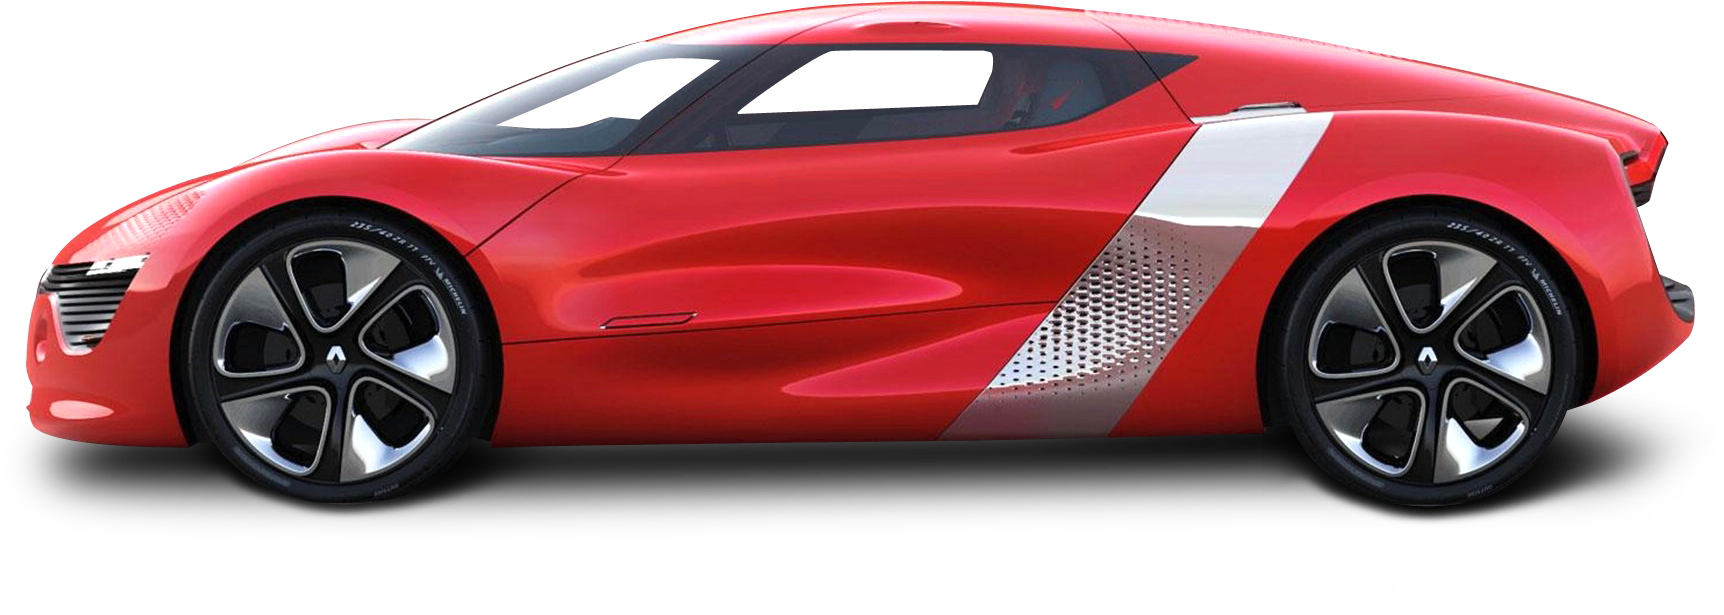 Red Renault Concept Car Side View PNG